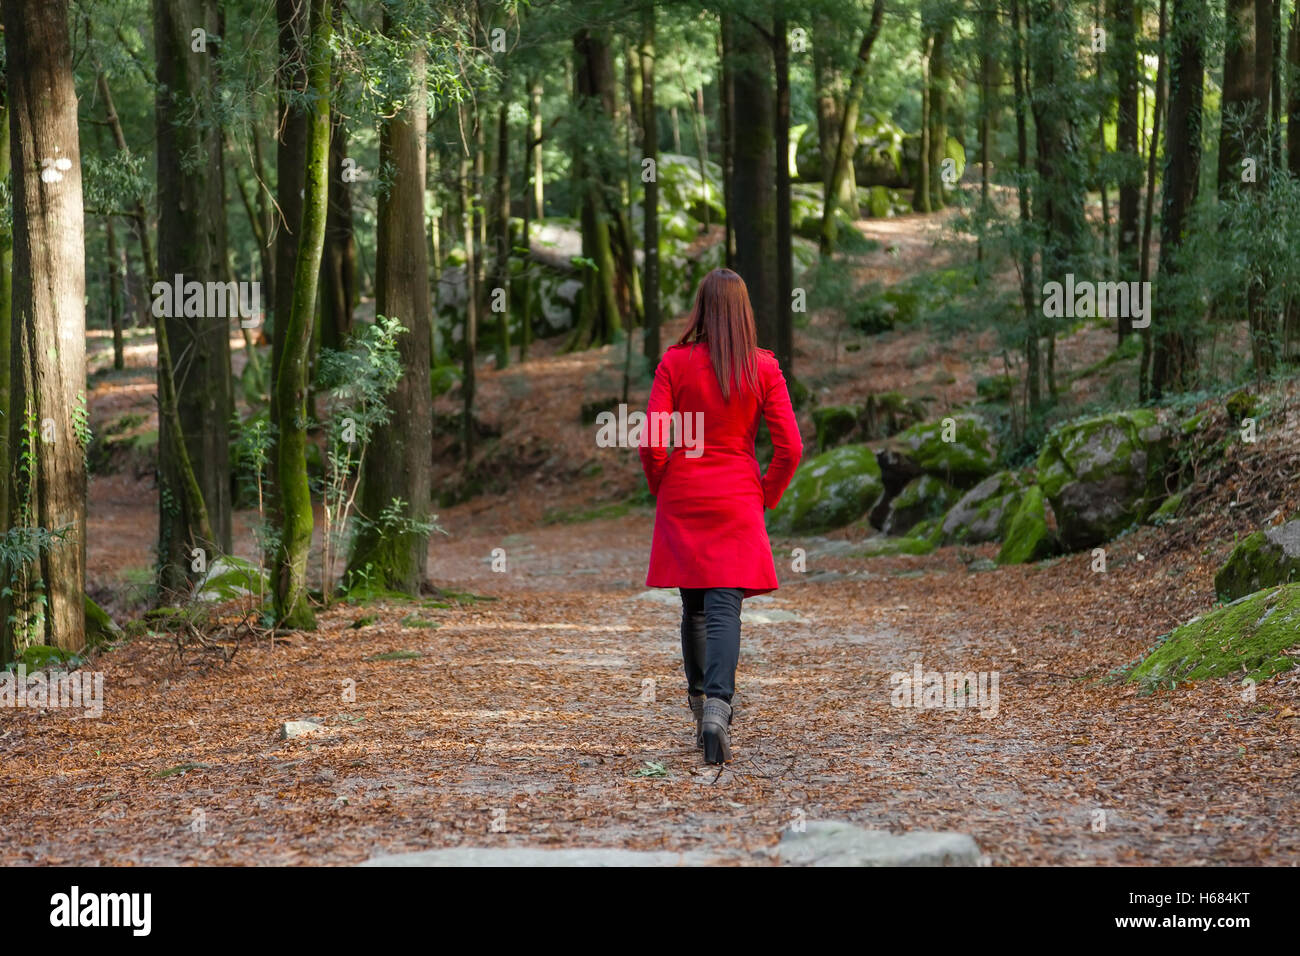 Young woman walking alone on a forest path wearing a red long coat Stock Photo